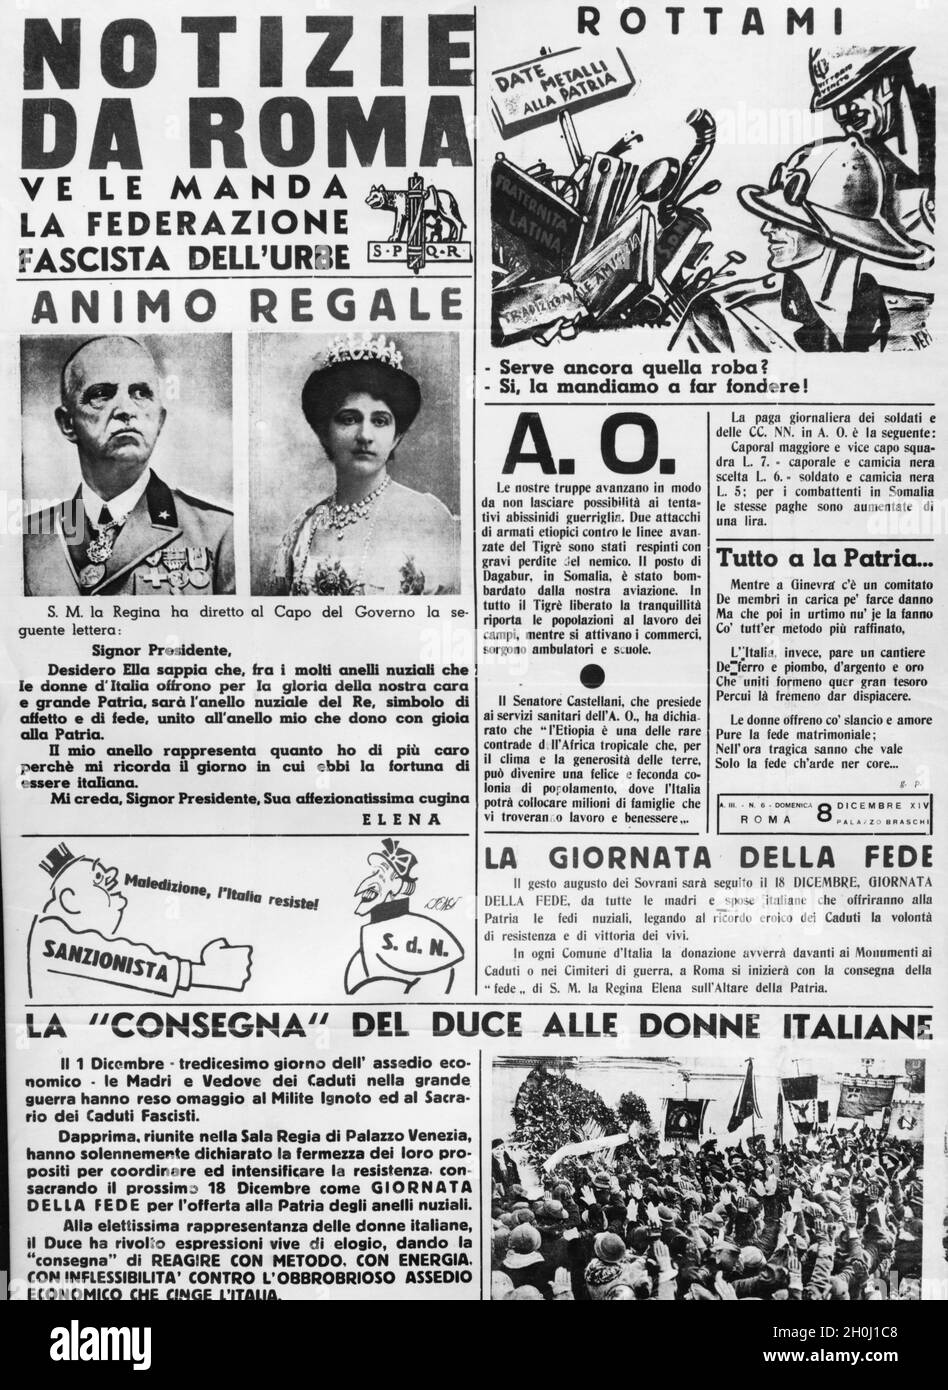 The wall newspaper ""Notizie da Roma"" was posted in all public buildings.  It was published by the Partito Nazionale Fascista (Rome local group) and  was intended by the regime as a propagandistic ""